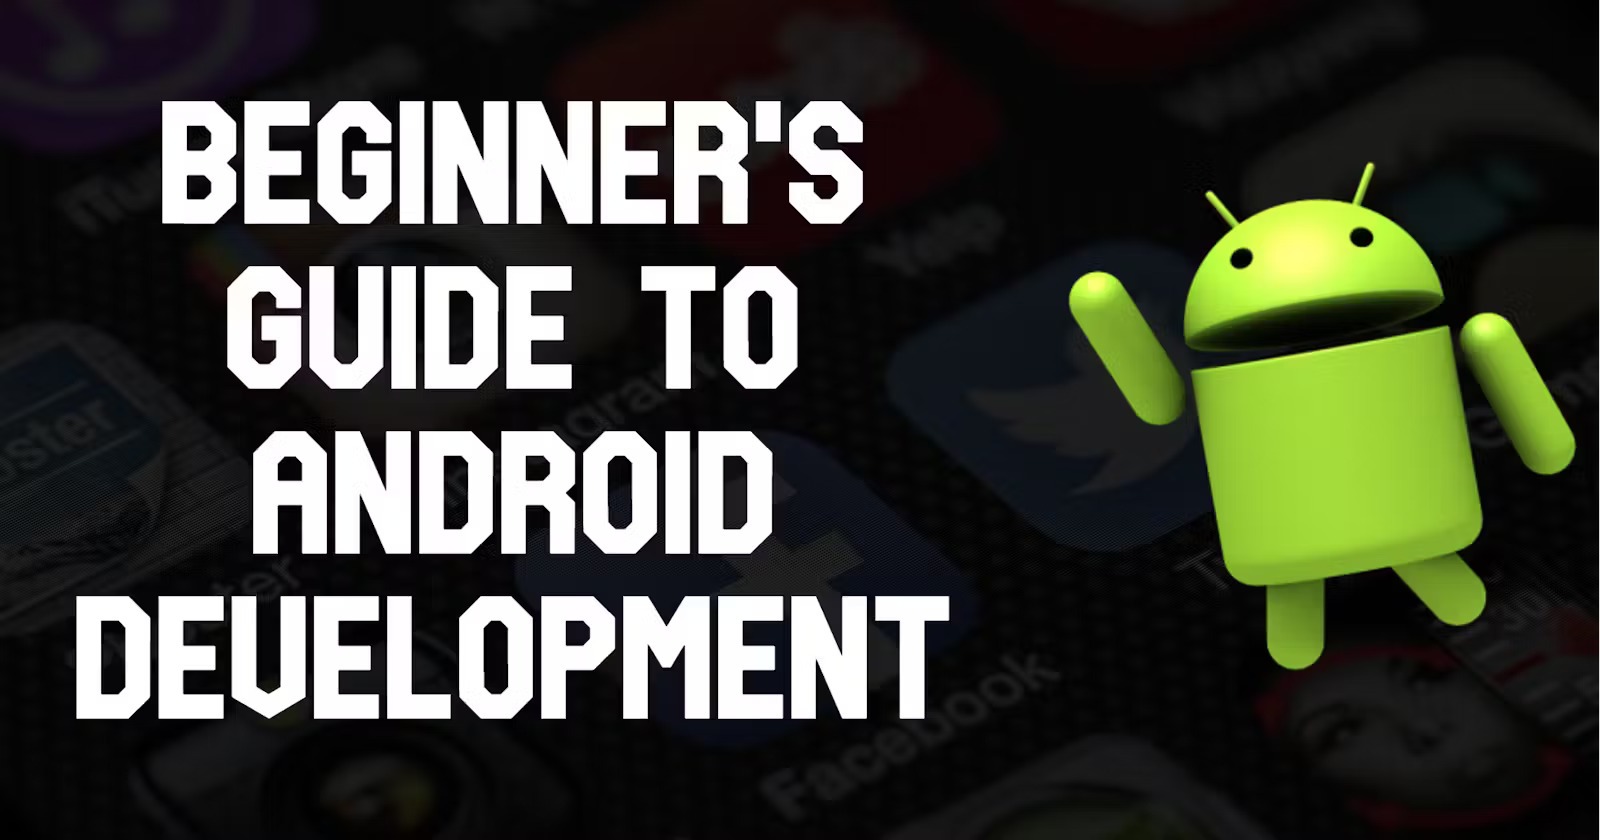 How to get started in Android Development